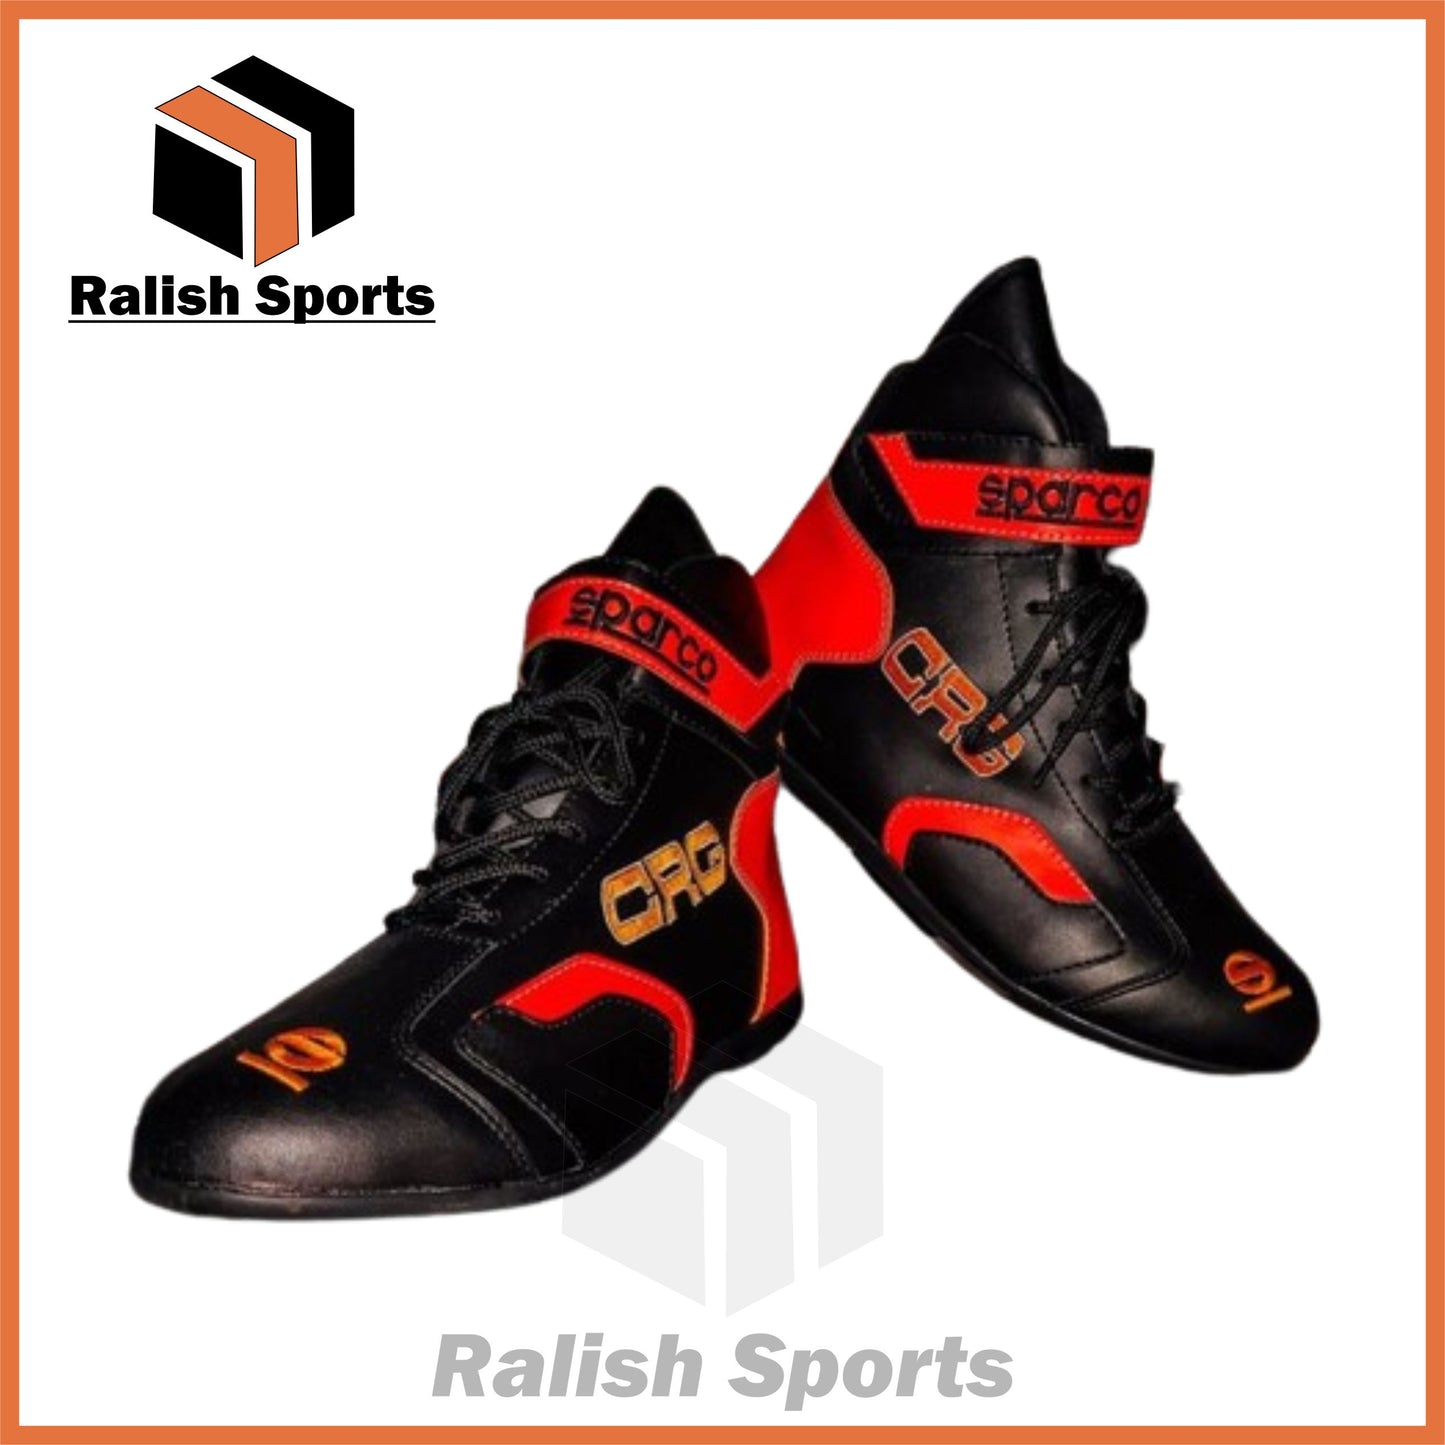 New CRG Sparco kart shoes